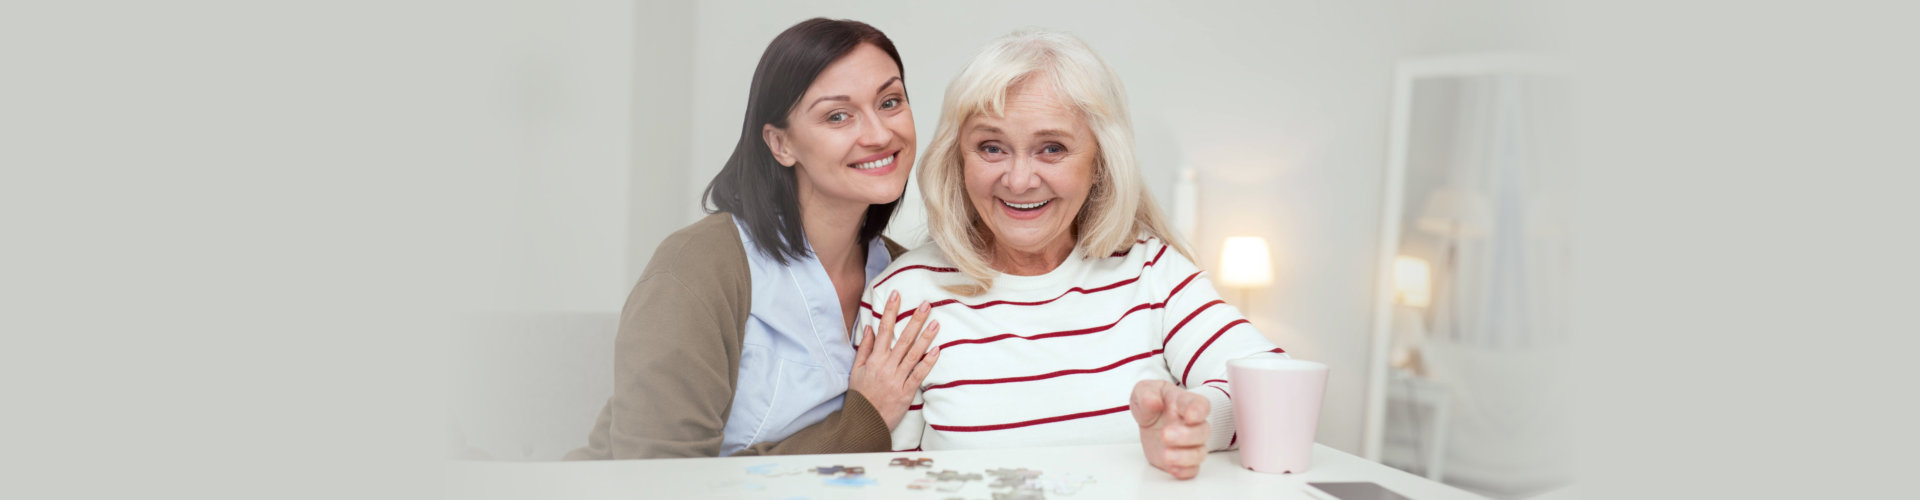 smiling female caregiver and her old woman patient